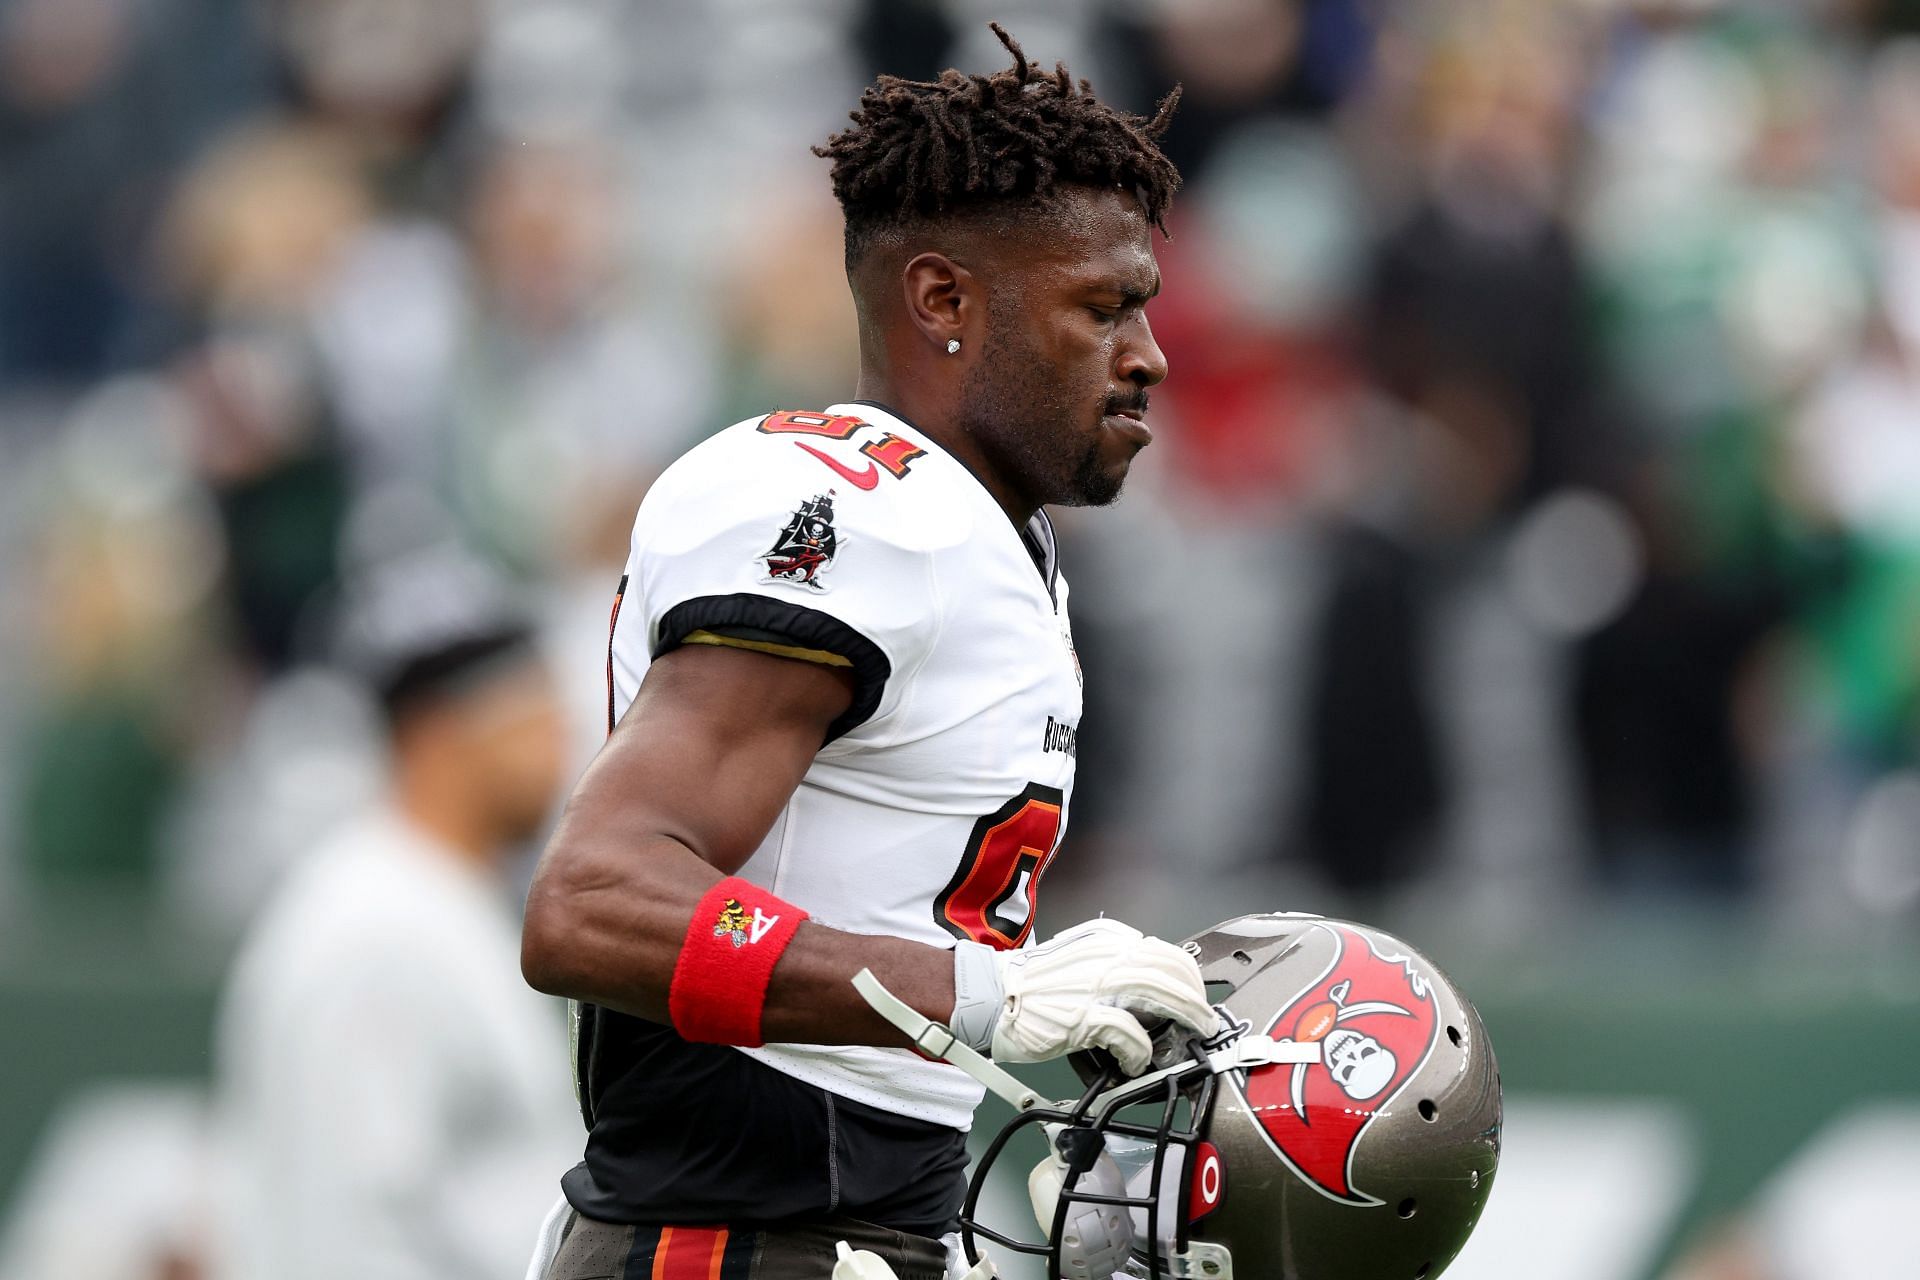 Antonio Brown last played for the Tampa Bay Buccaneers